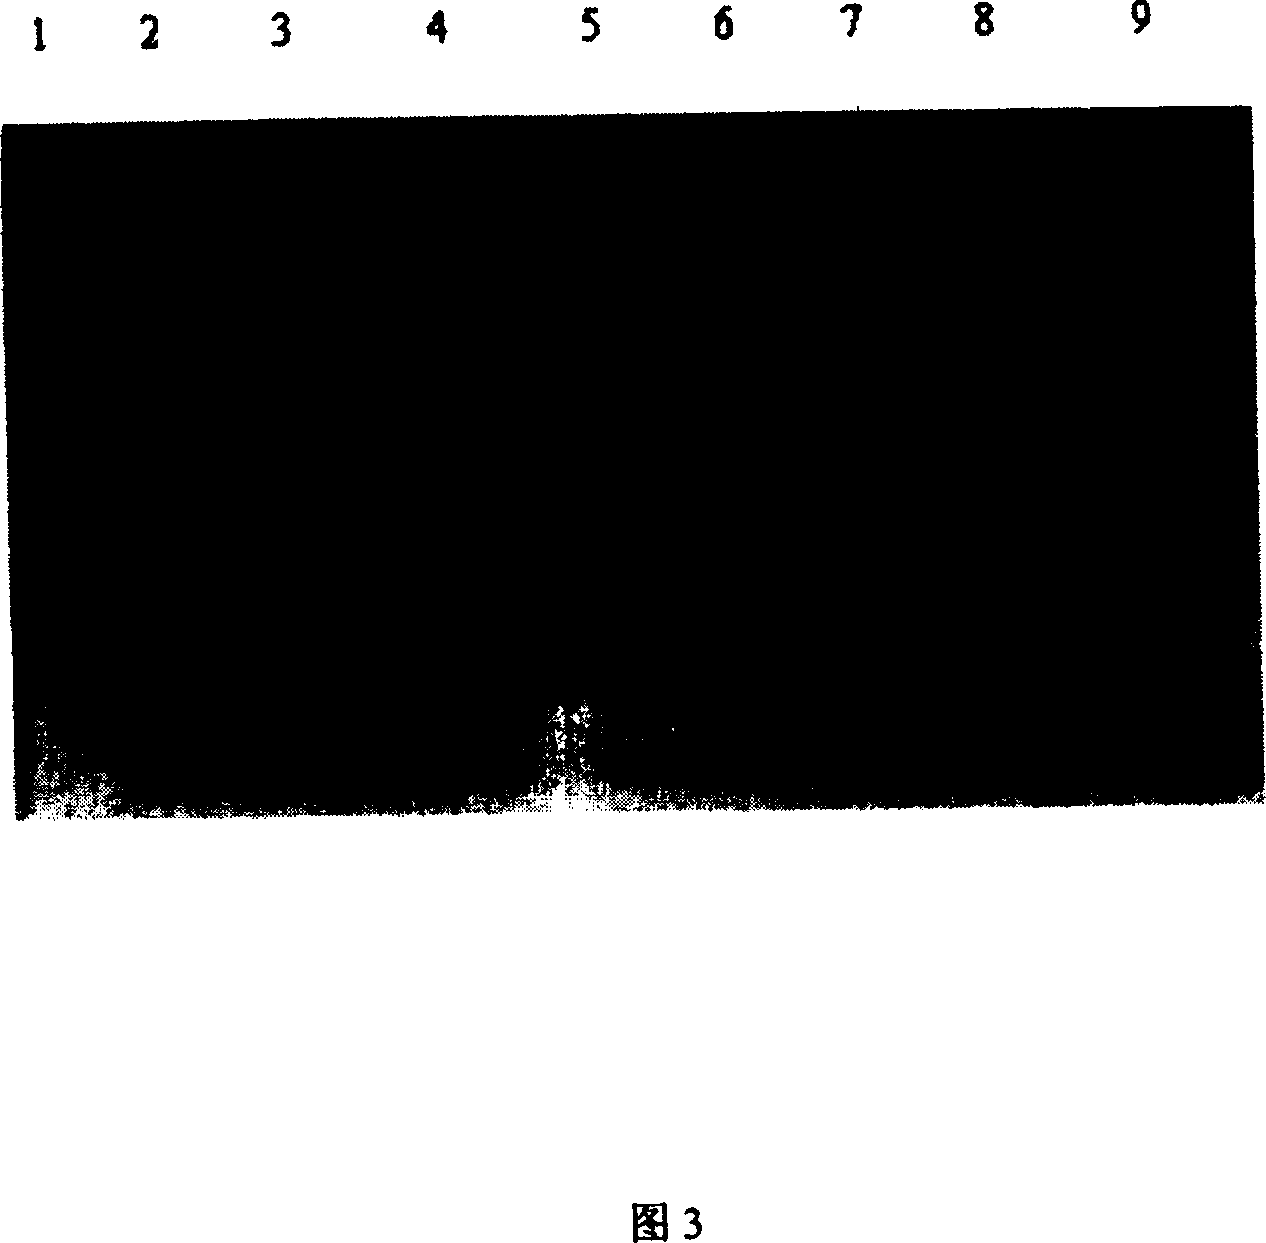 Interfusion protein of antineoplastic genetic engineering composed of target short peptide of receptor of epidermal growth factor and Lidamycin